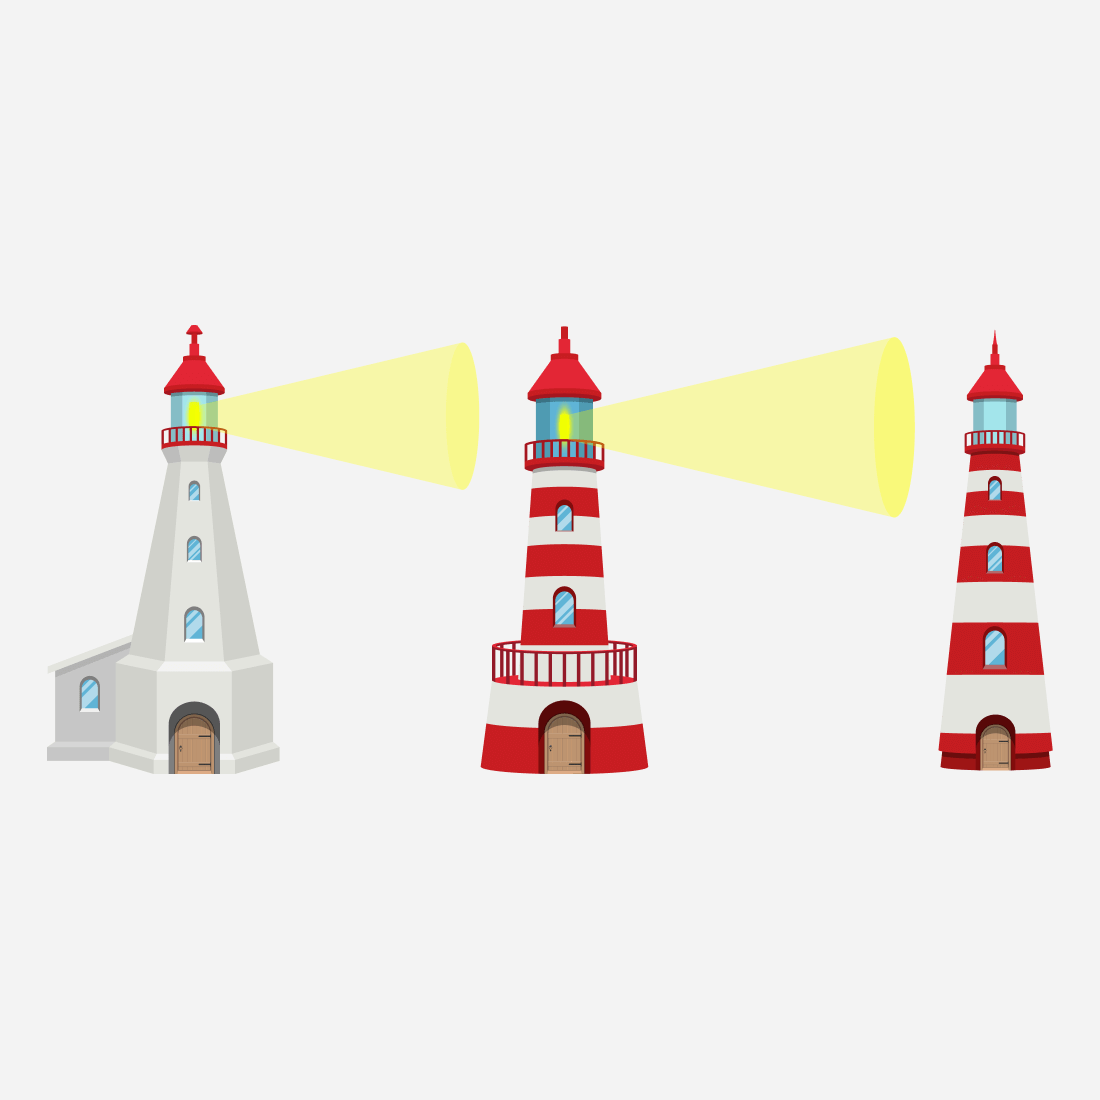 Lighthouses are more rounded and more square with and without railings.